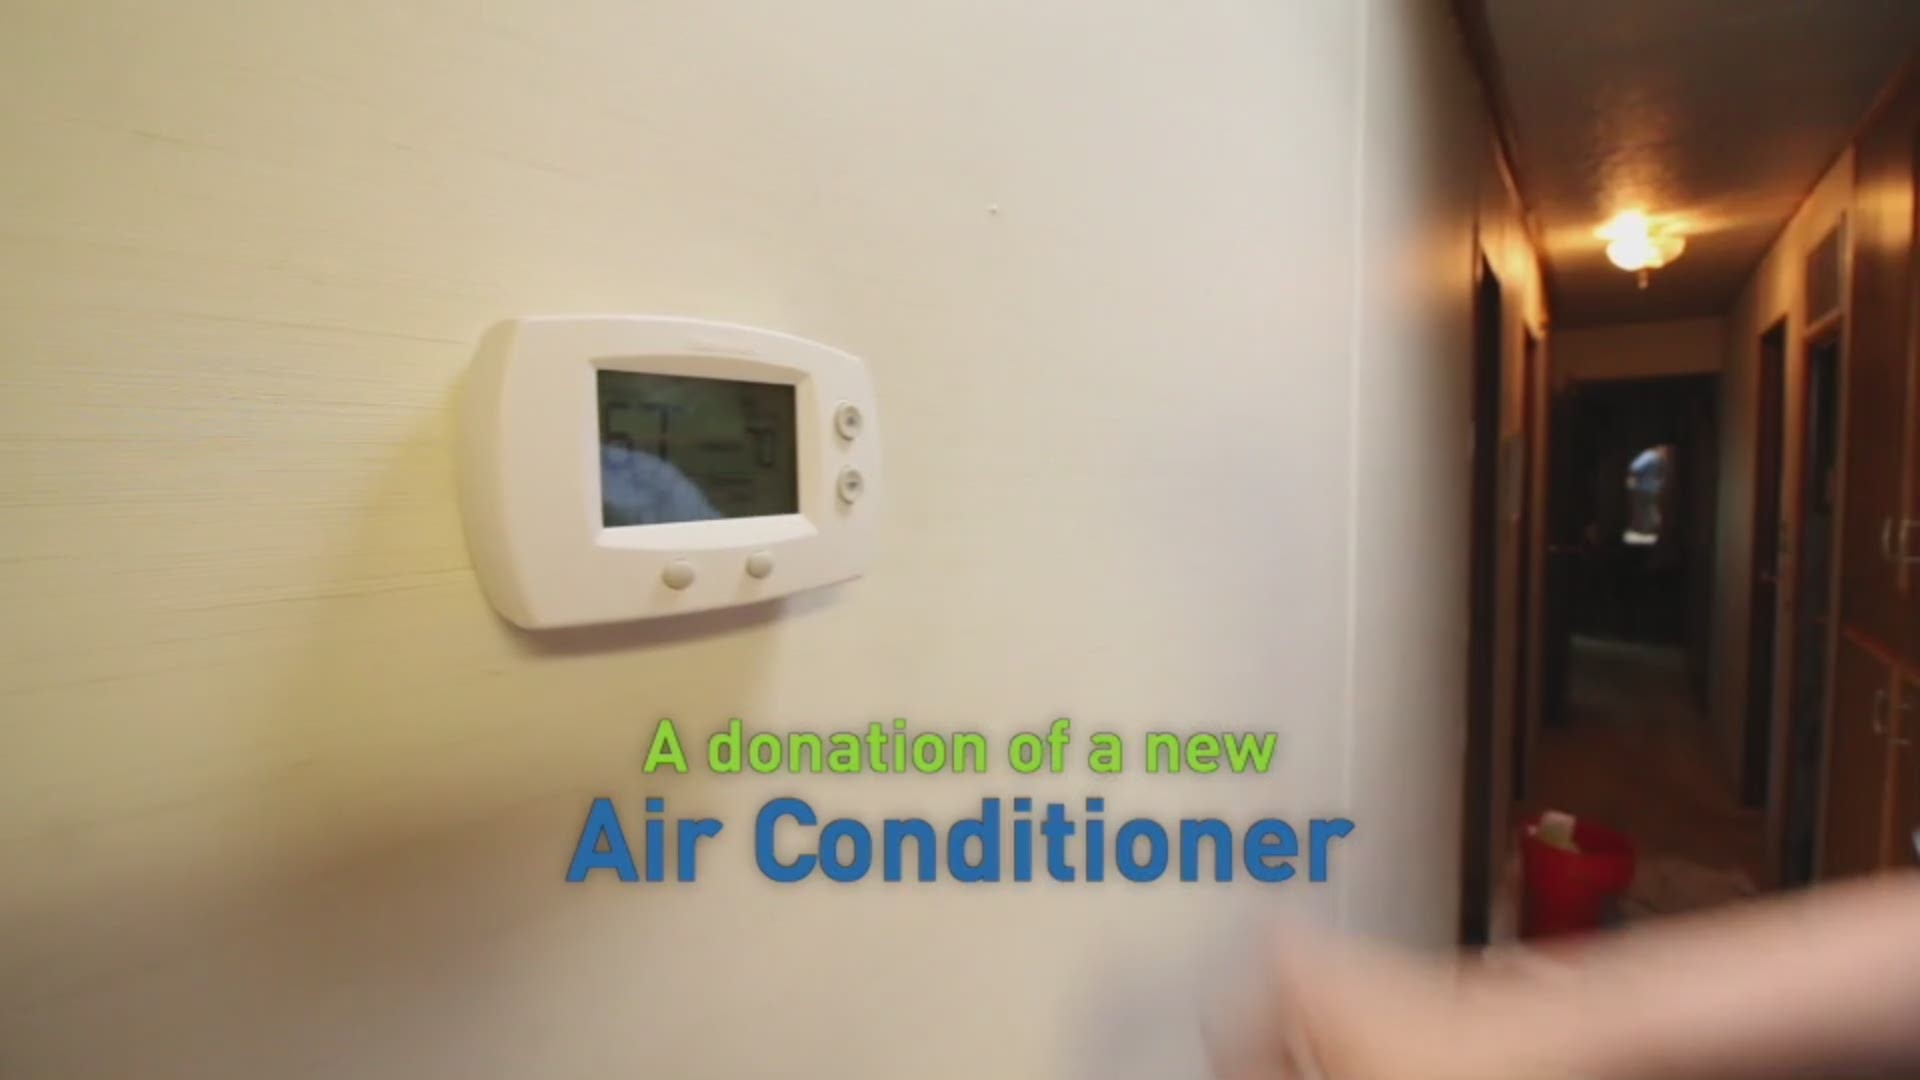 ompanies like Sturm Heating & A/C are making a difference in Spokane. Watch below to see the story of Dale and Peggy receiving their brand new AC unit donated by Sturm.